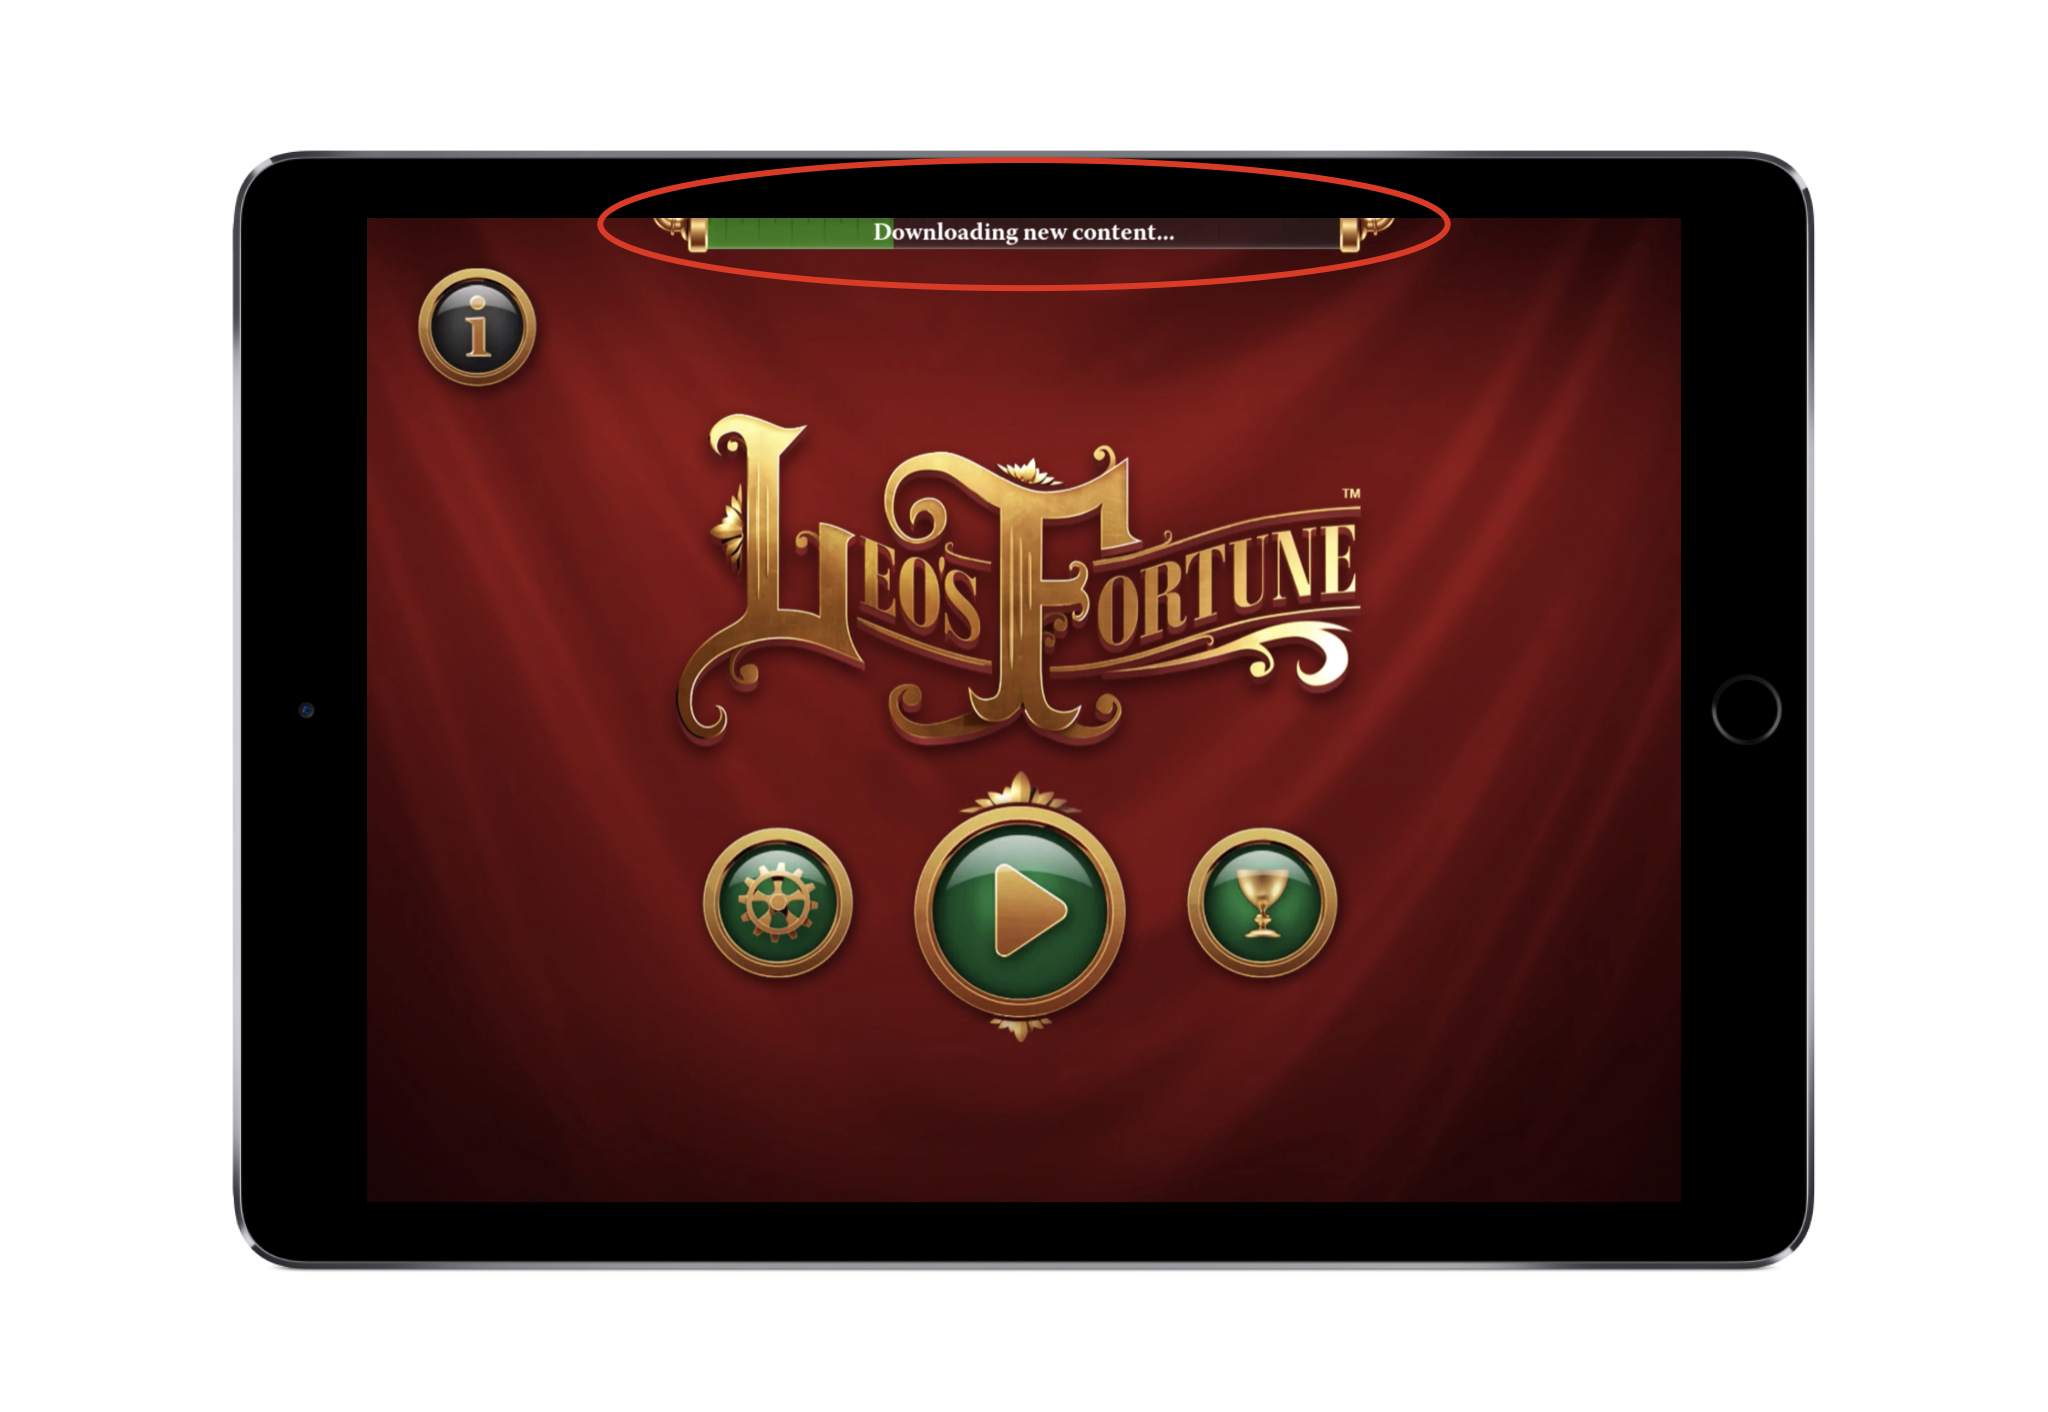   Leo's Fortune  begins to download additional content upon launch but still allows the user to progress forward.&nbsp; 